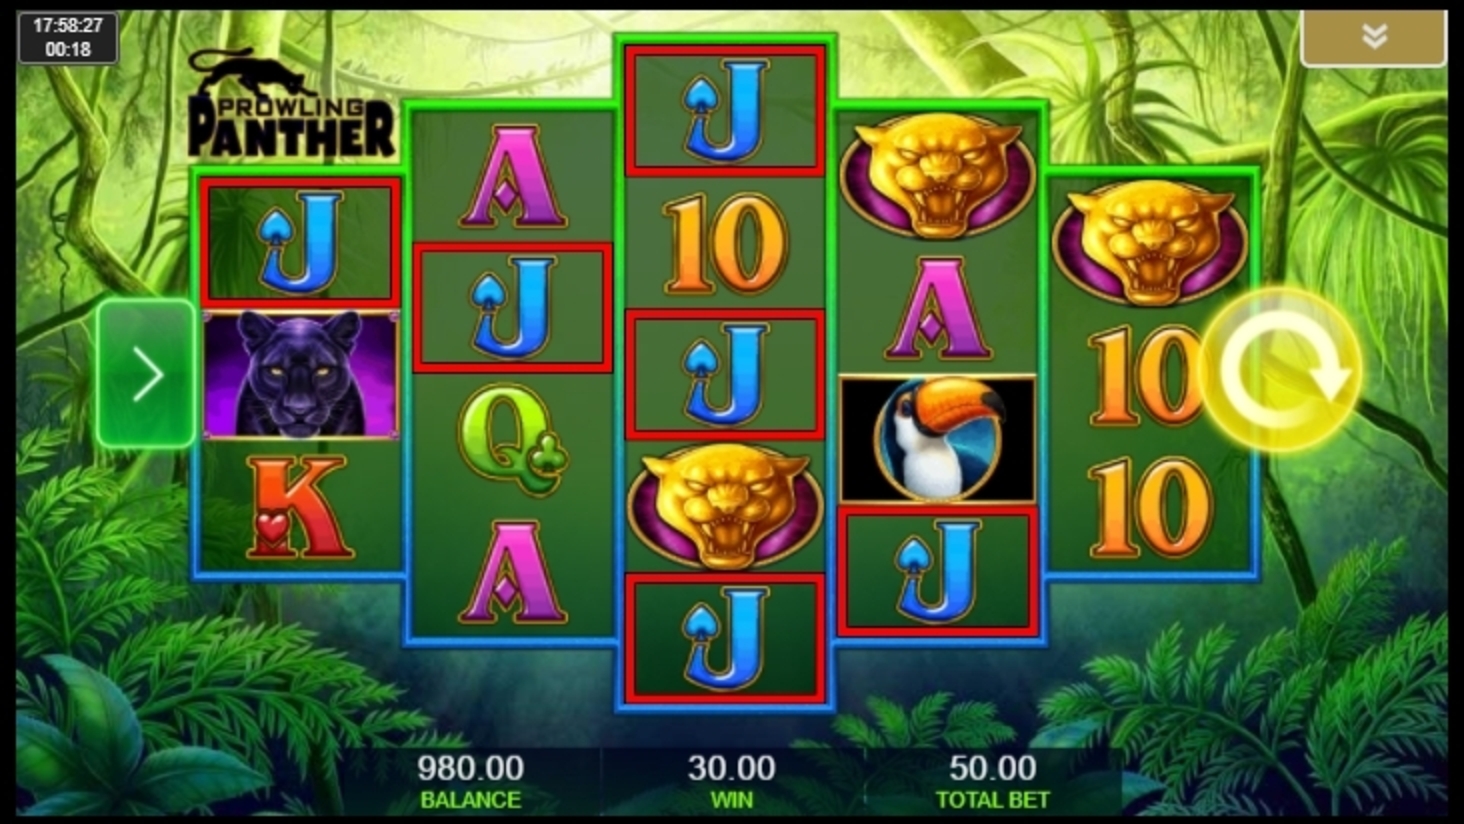 Win Money in Prowling Panther Free Slot Game by IGT